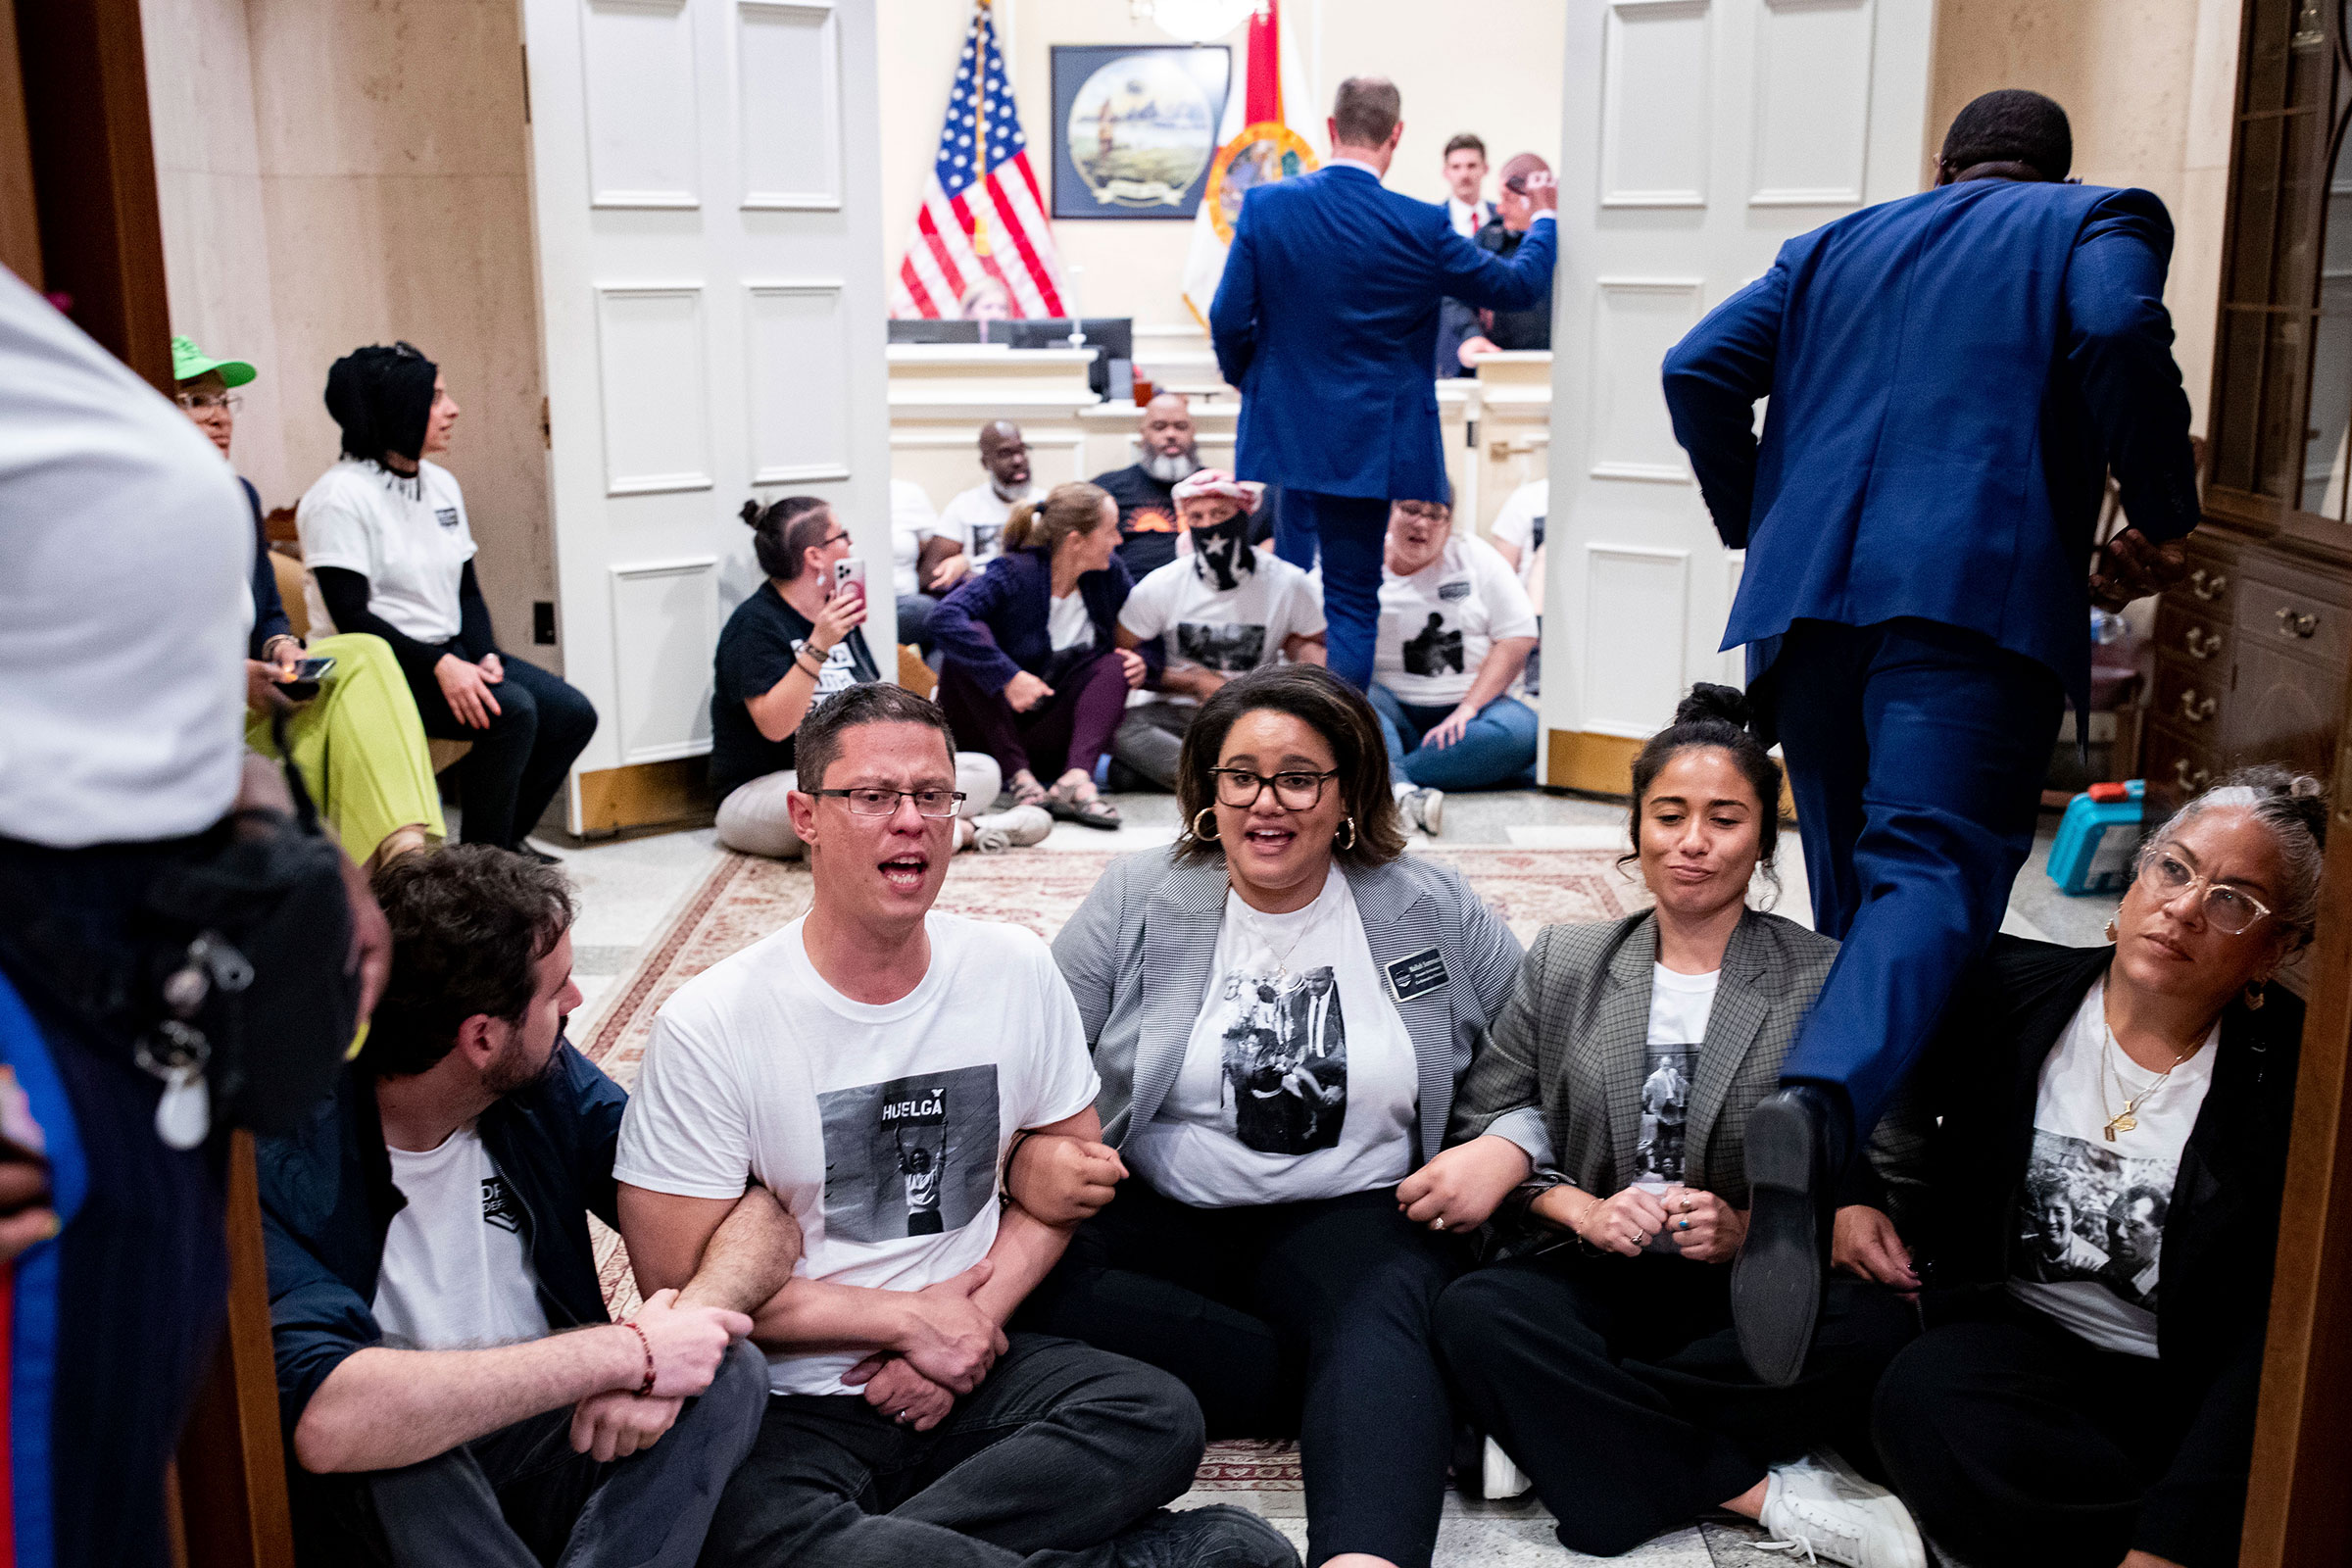 Activists stage a sit-in outside DeSantis' office as they speak out against the governor and his policies on May 3